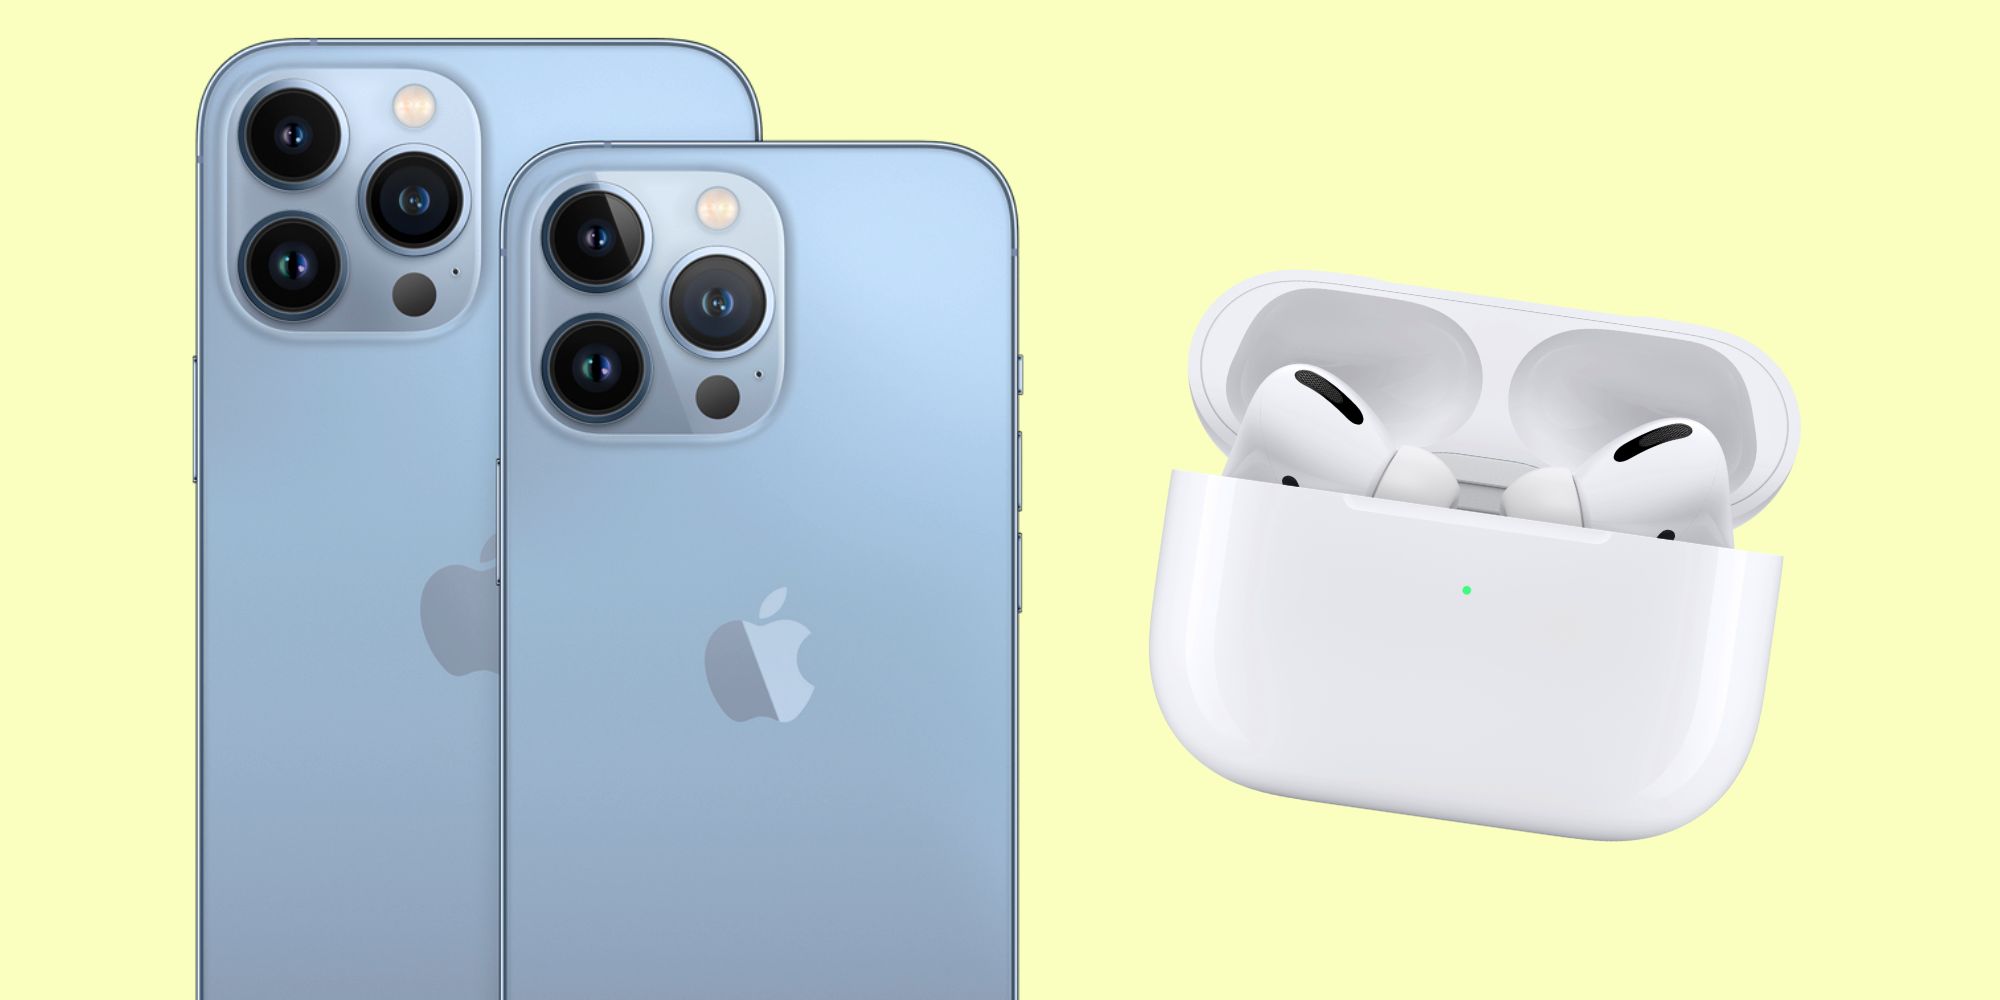 Two iPhones next to a pair of AirPods